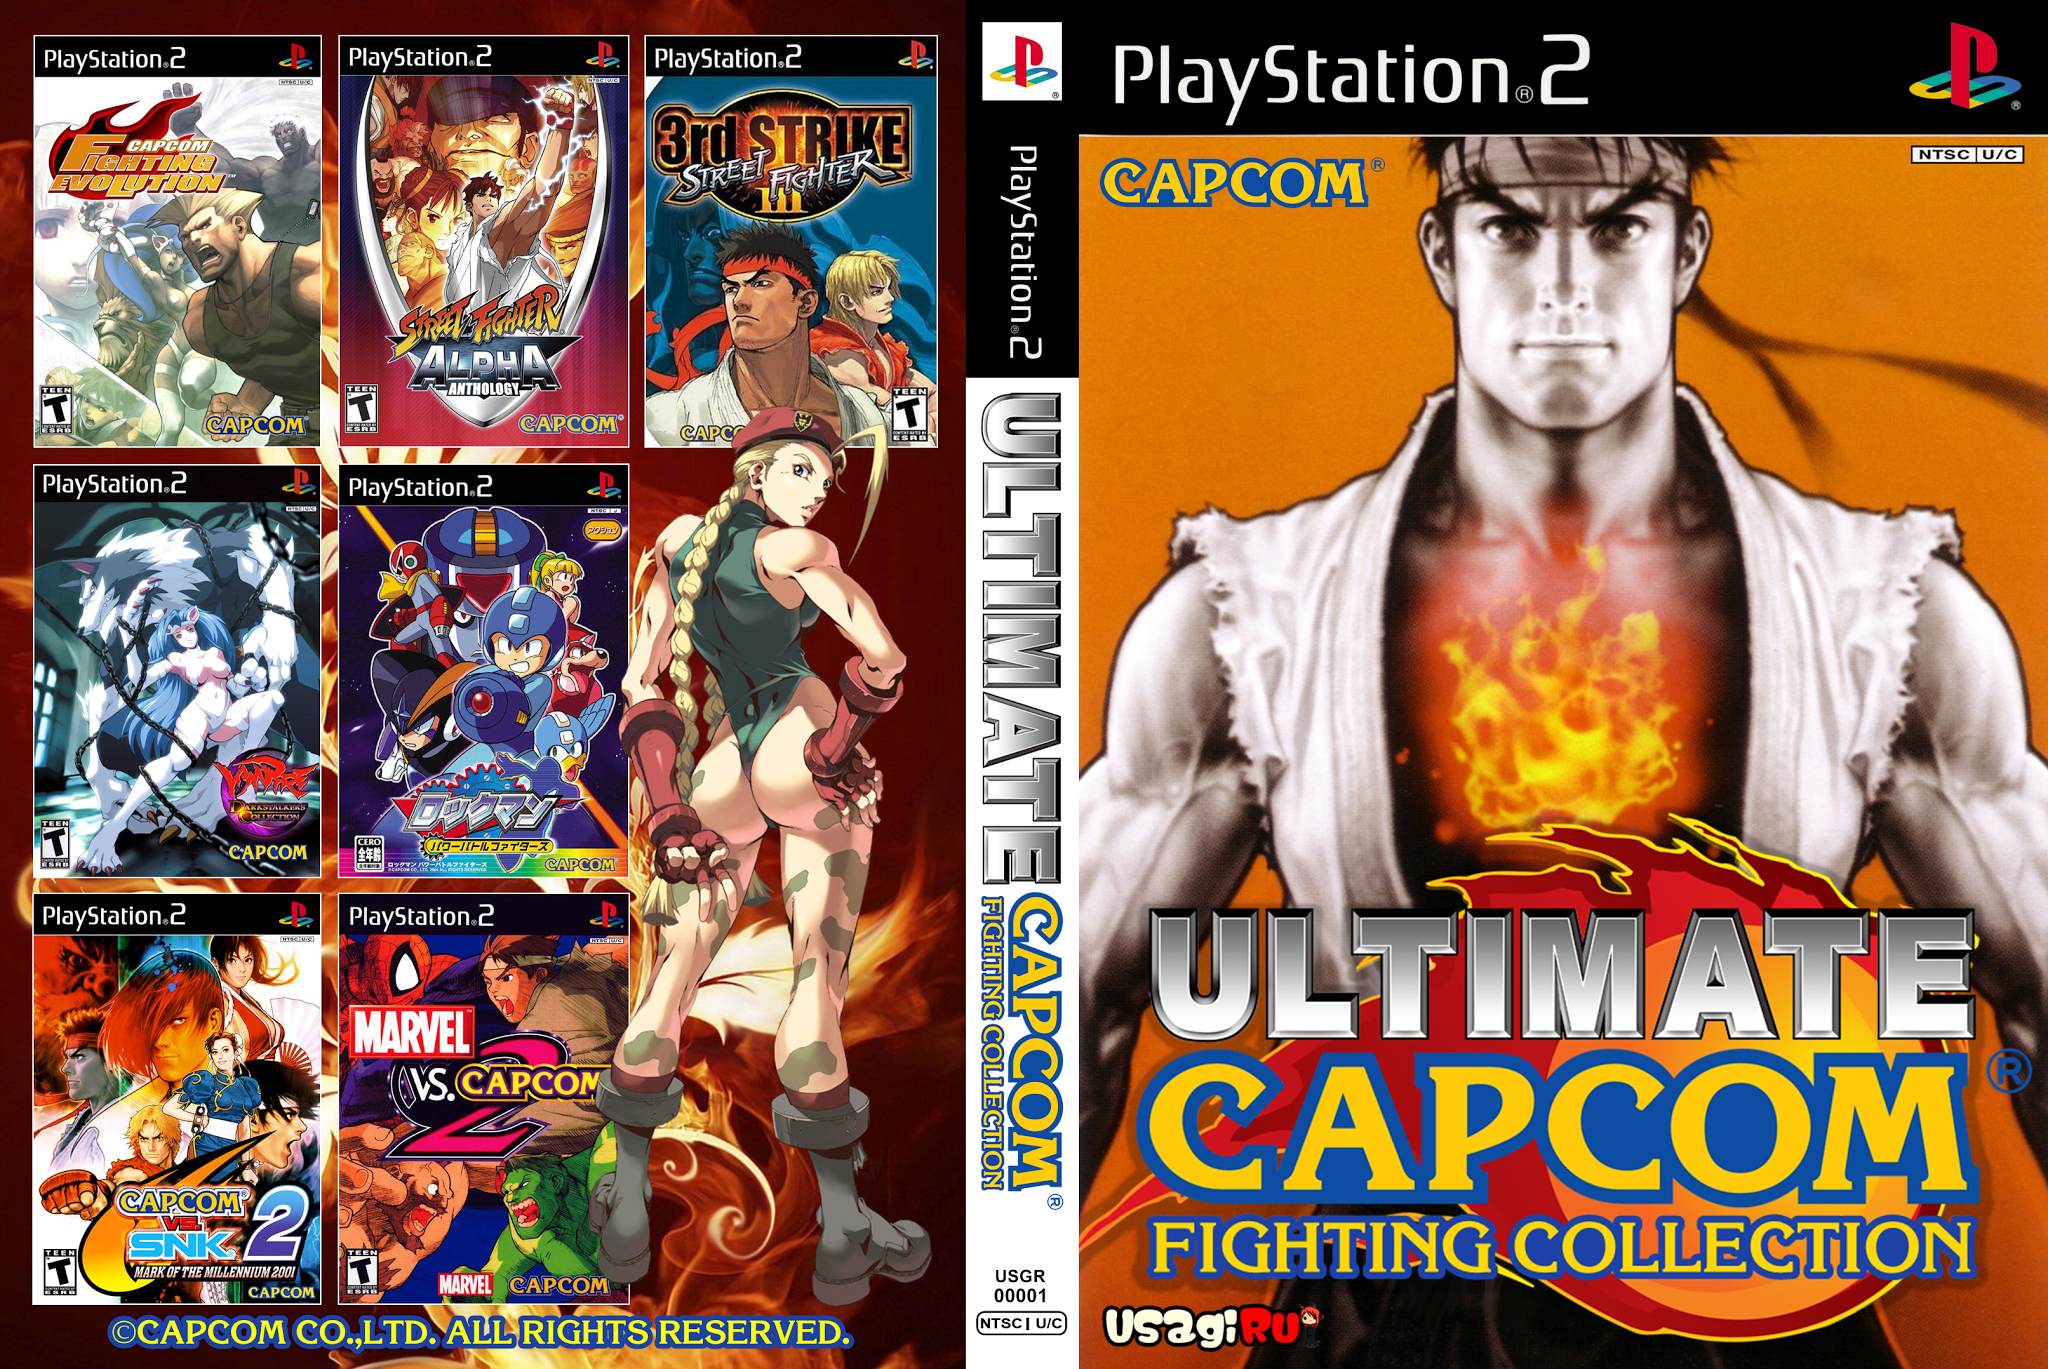 Capcom collection. Street Fighter collection Disc PS 1. Street Fighter collection Disc 1 ps1. Capcom Fighting на ps2. Street Fighter 2 ps2.